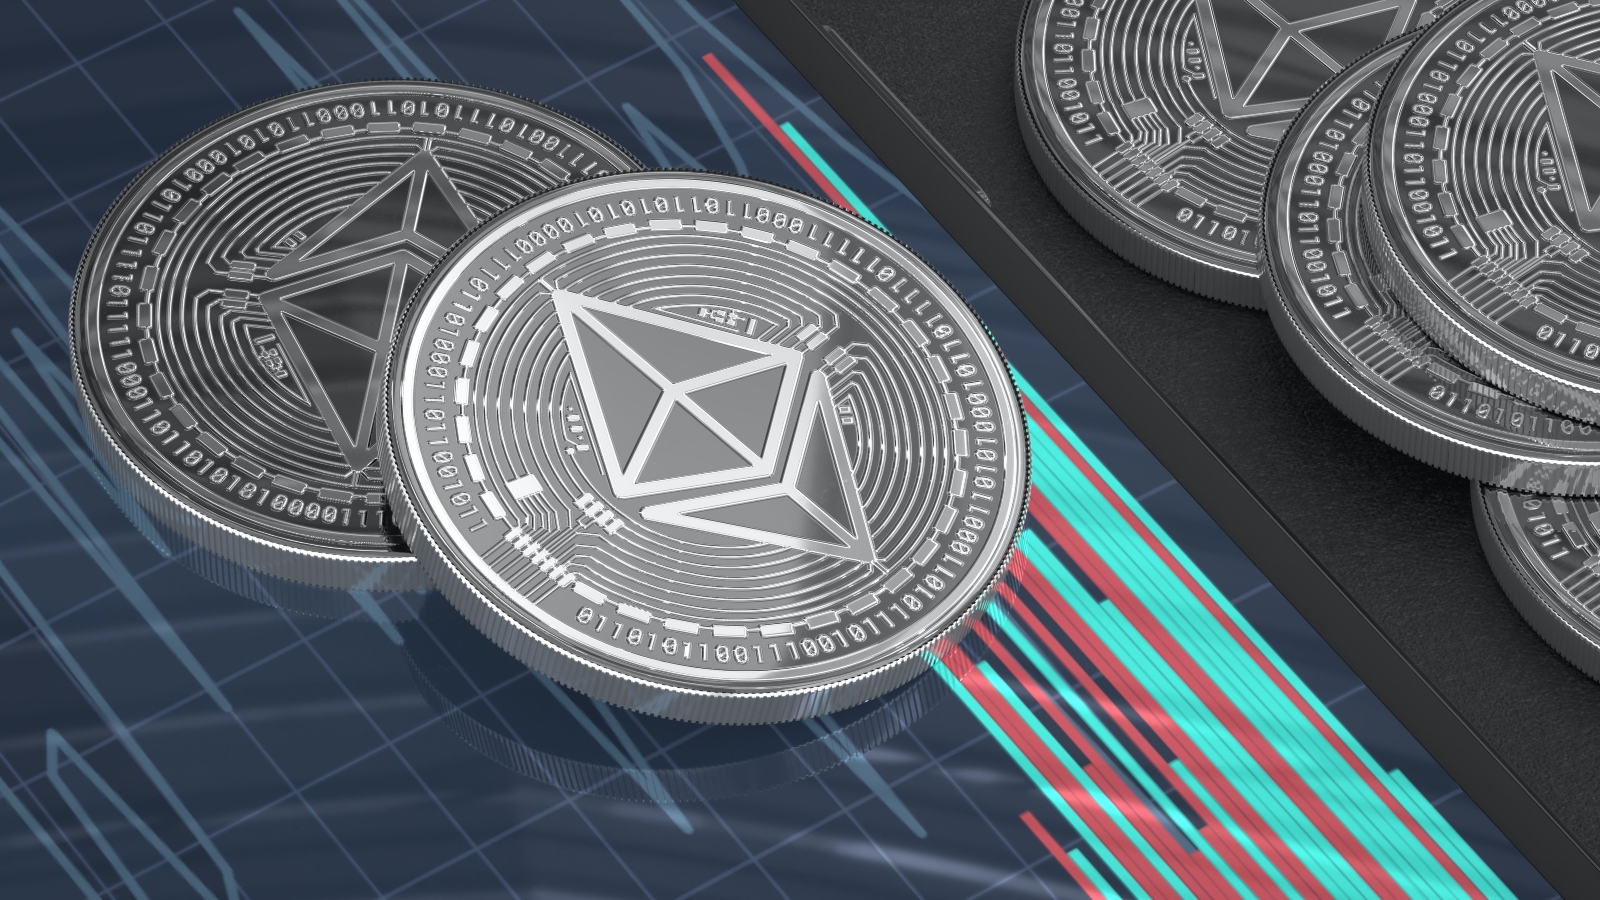 Binance Users Can Redeem Their Staked Ethereum Beginning April 19th